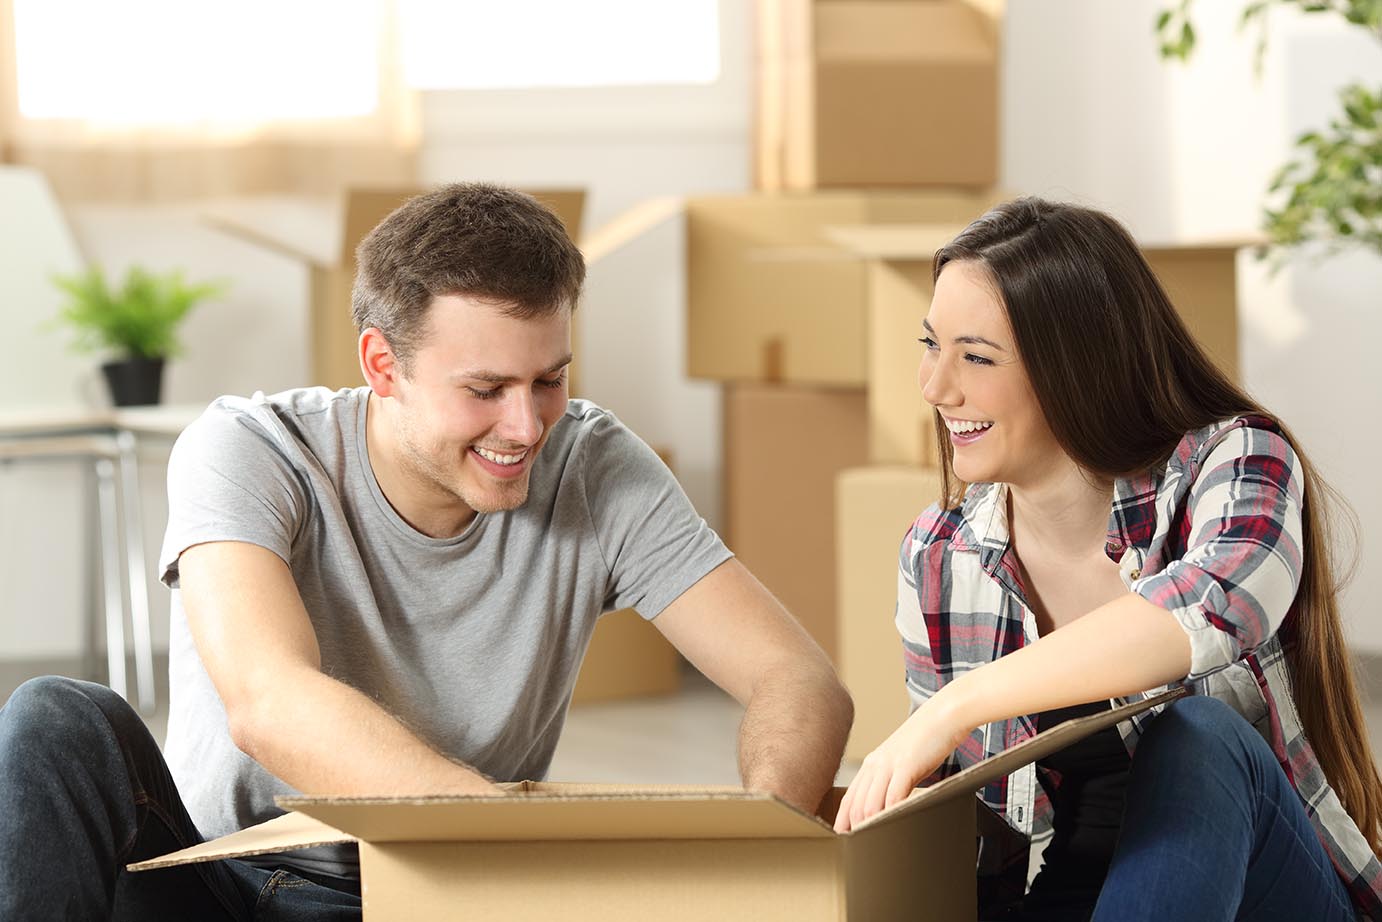 There are many benefits to hiring a packing service, including: